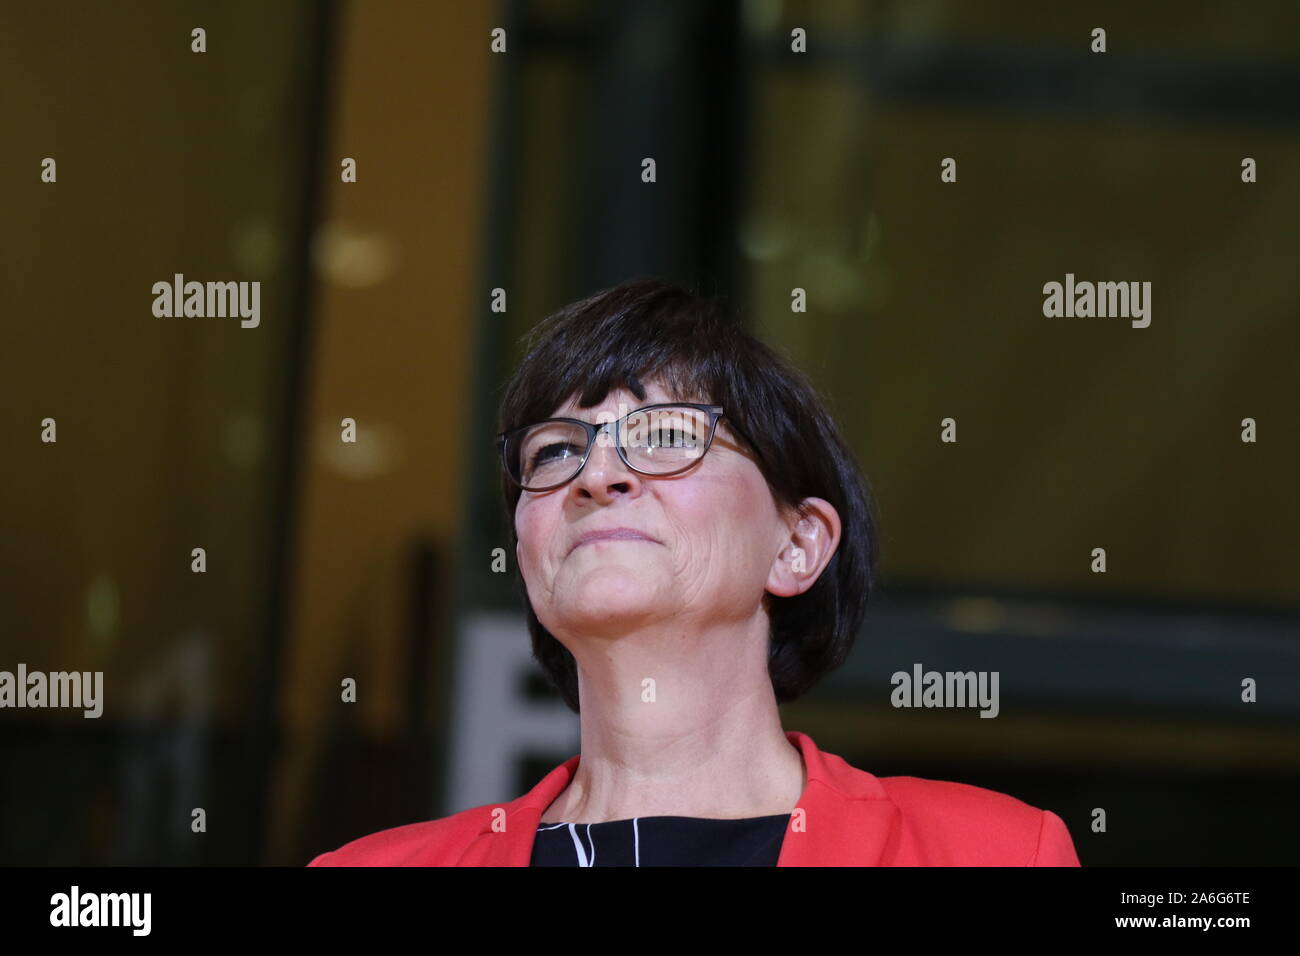 Germany, Berlin, 10/26/2019.Saskia Esken in the SPD headquarters in Berlin. The SPD members elect Federal Finance Minister Olaf Scholz and Klara Geywitz just ahead of Norbert Walter-Borjans and Saskia Esken for the SPD presidency. The race for the SPD presidency goes into the runoff election in November: the two candidates will then be elected at the party congress. Stock Photo